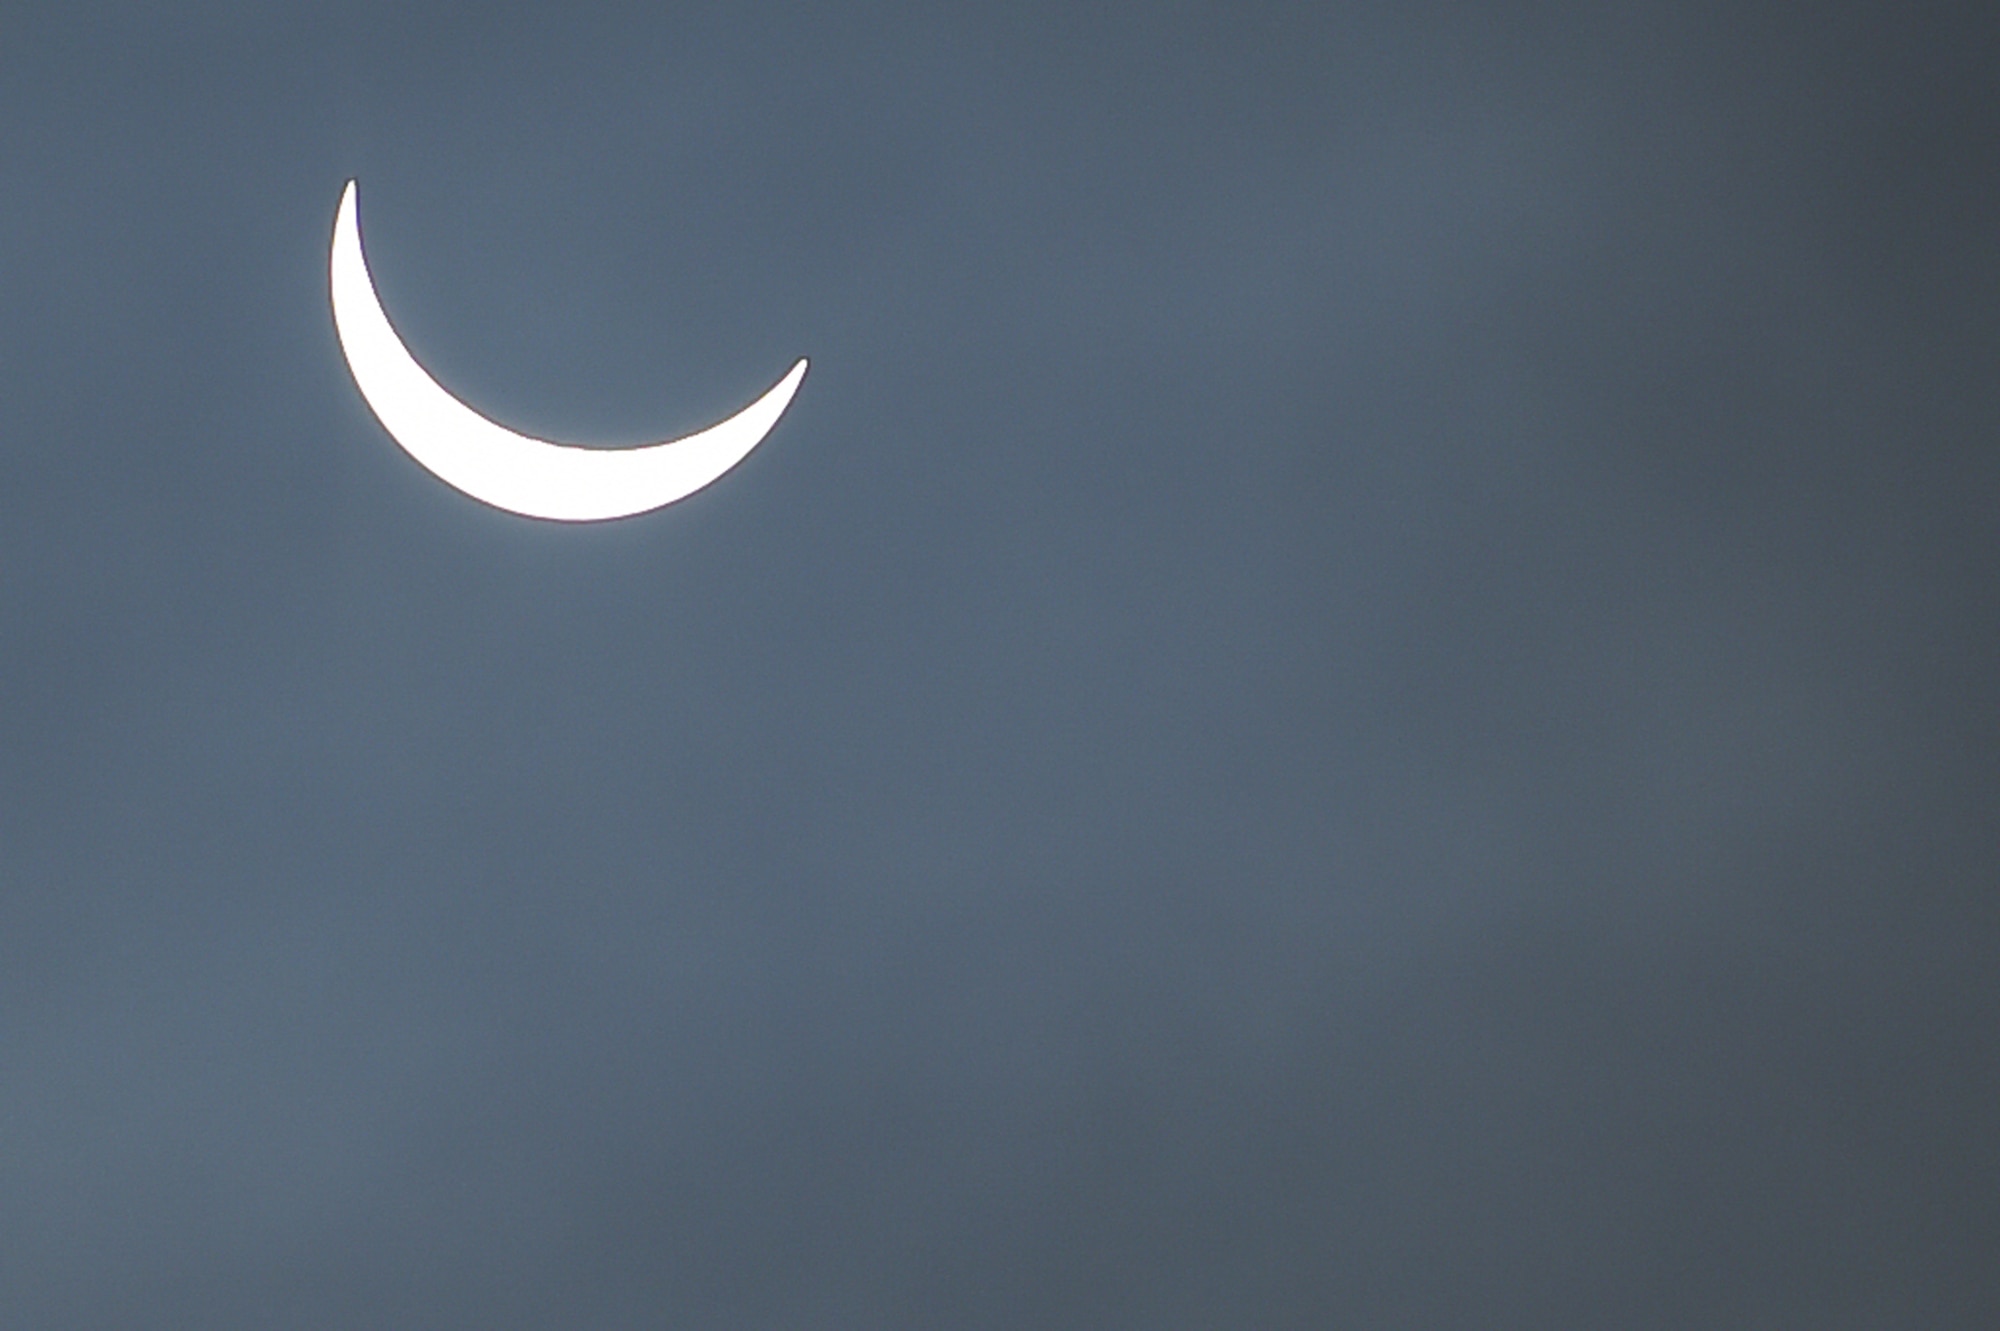 The moon continues its pass between the sun and the Earth at 9:31 a.m. during a solar eclipse, visible from RAF Alconbury, England, March 20, 2015. An 83 percent eclipse was visible throughout the entire United Kingdom. (U.S. Air Force photo by Staff Sgt. Jarad A. Denton/Released)